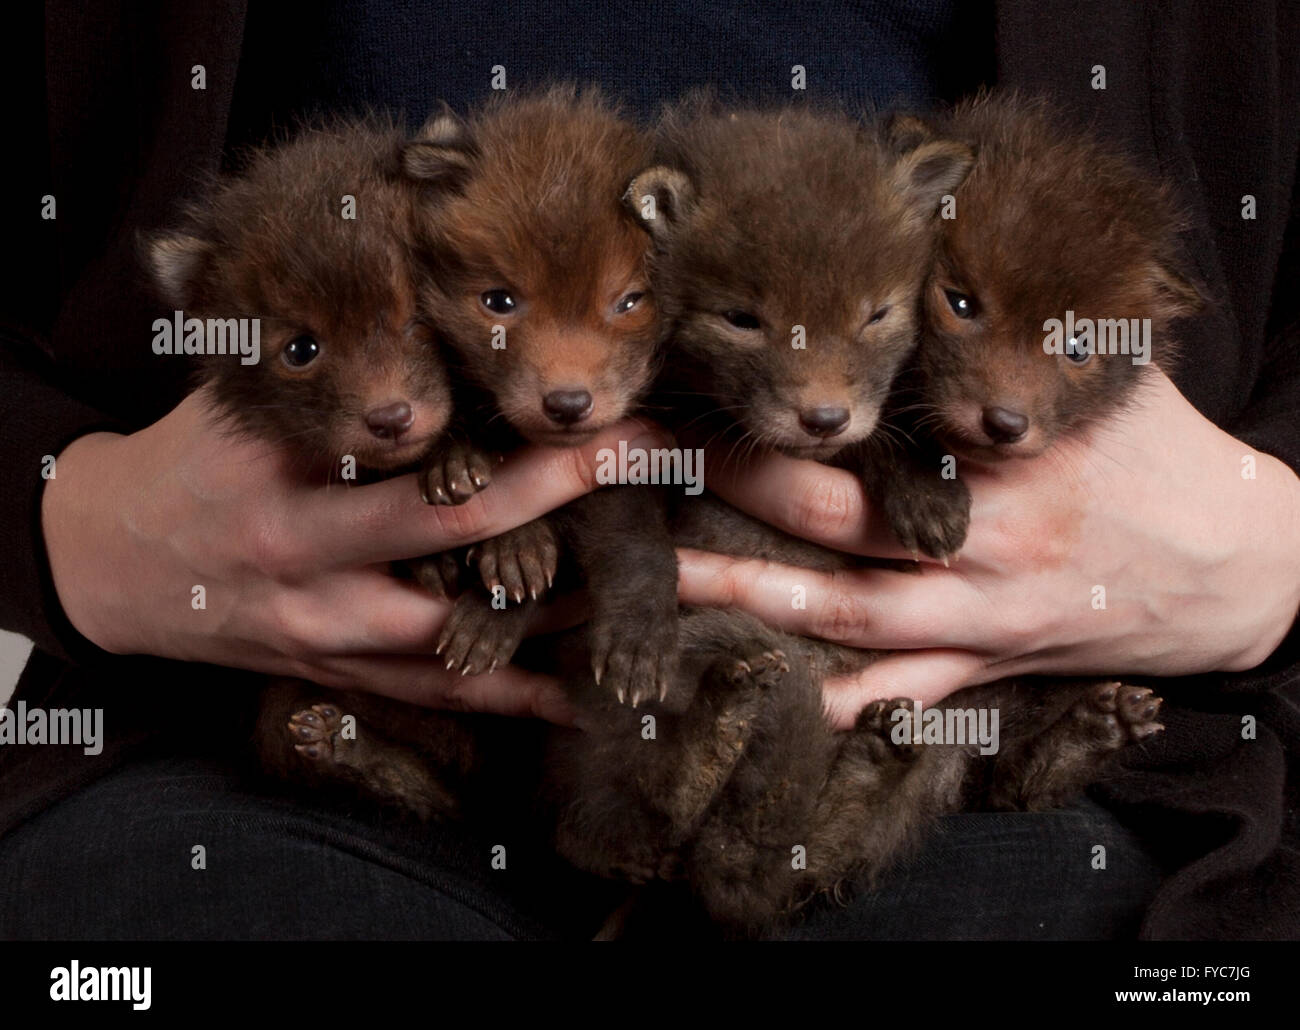 Orphaned red fox cubs in hand, studio shot Stock Photo